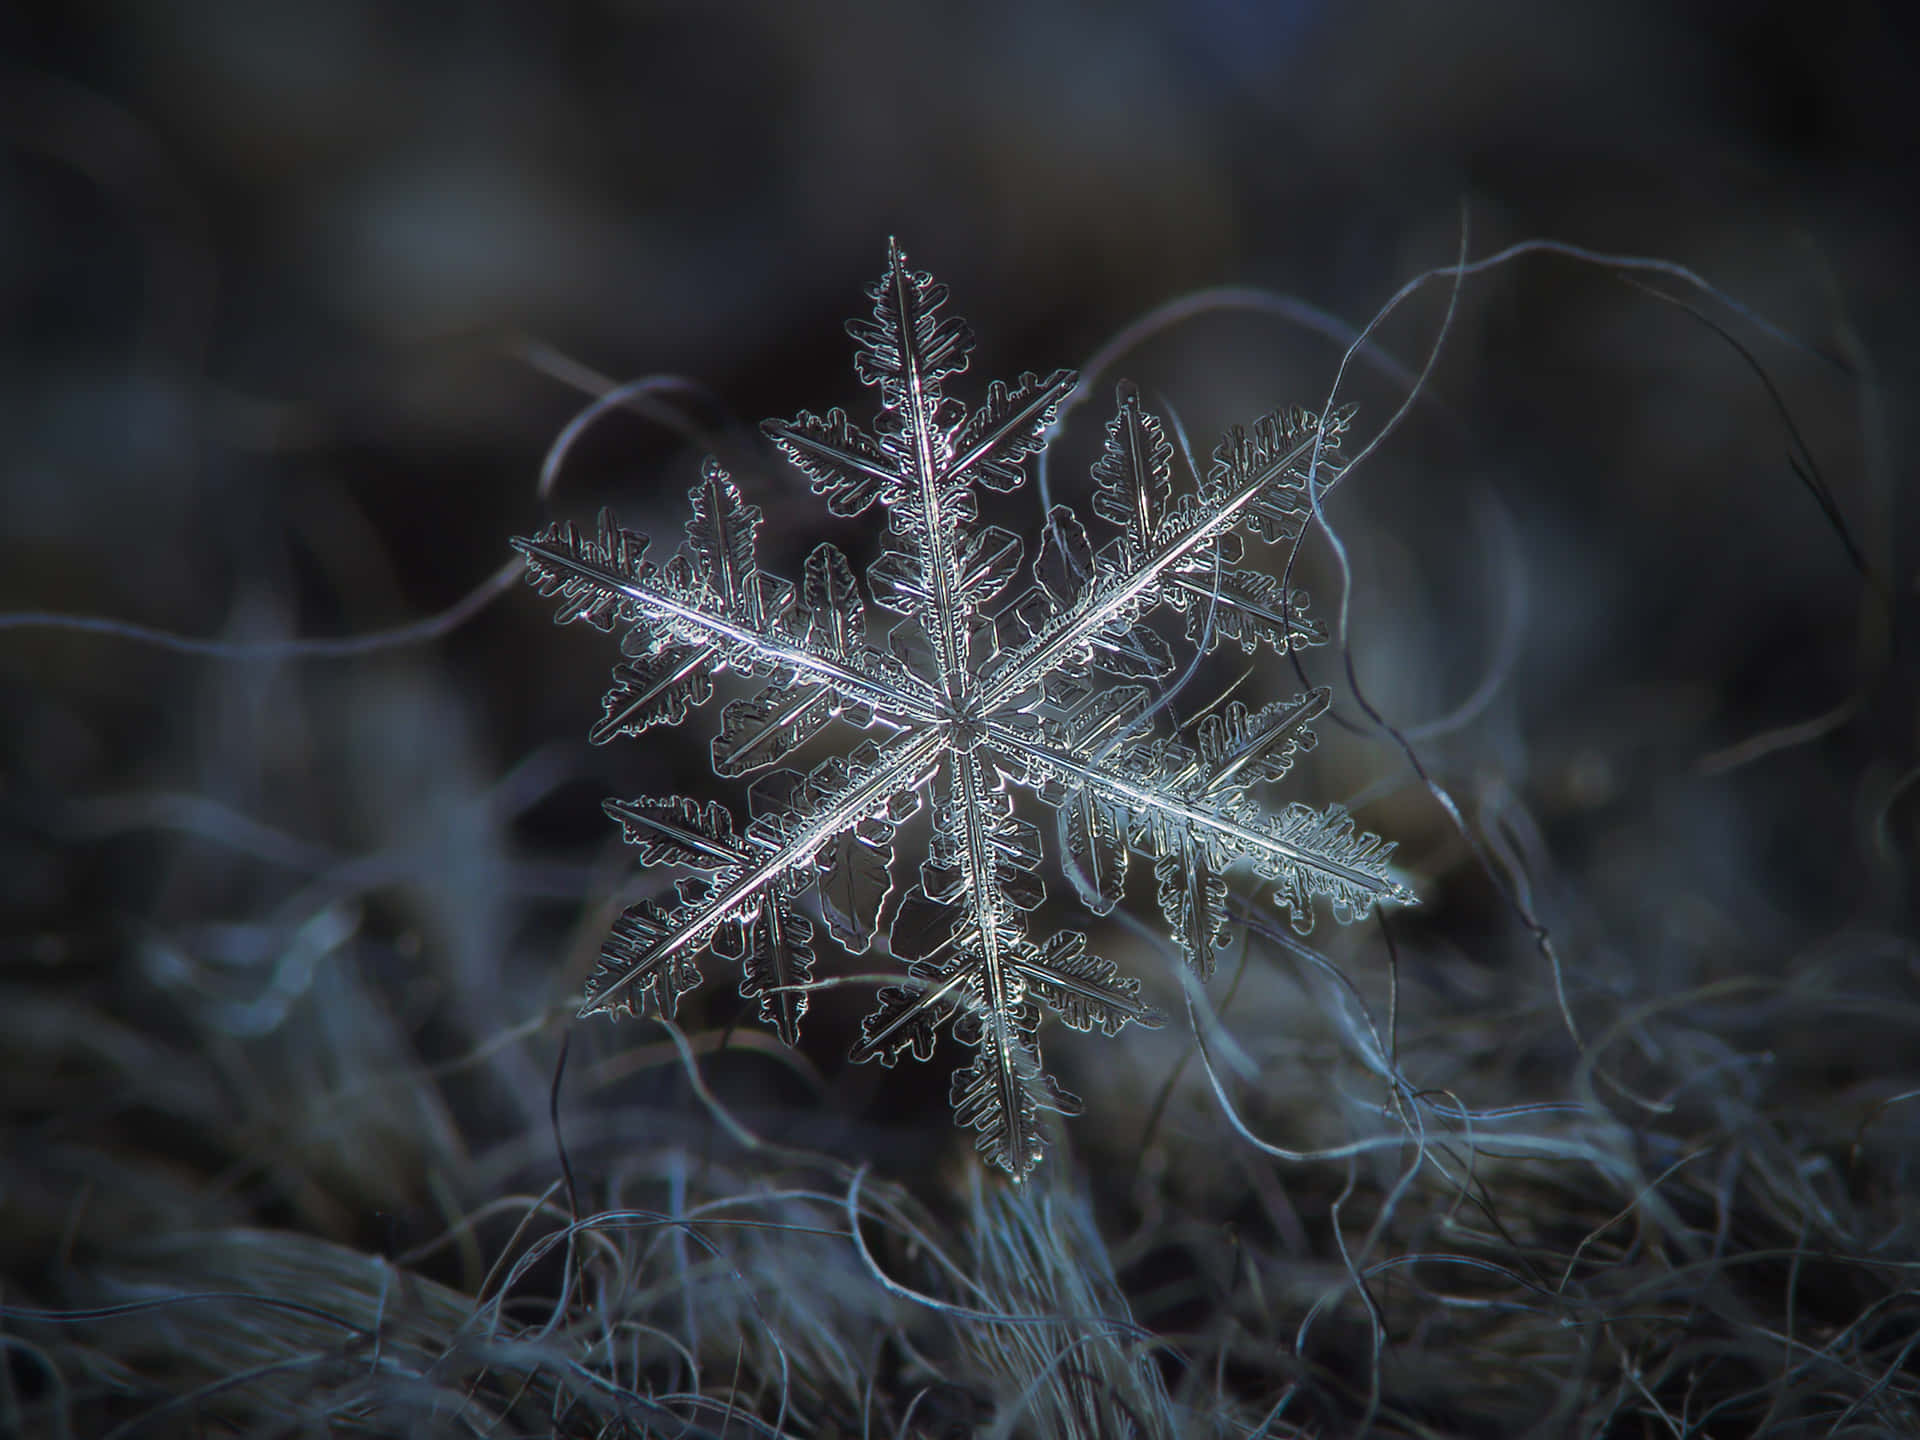 A close-up view of a stunning snowflake